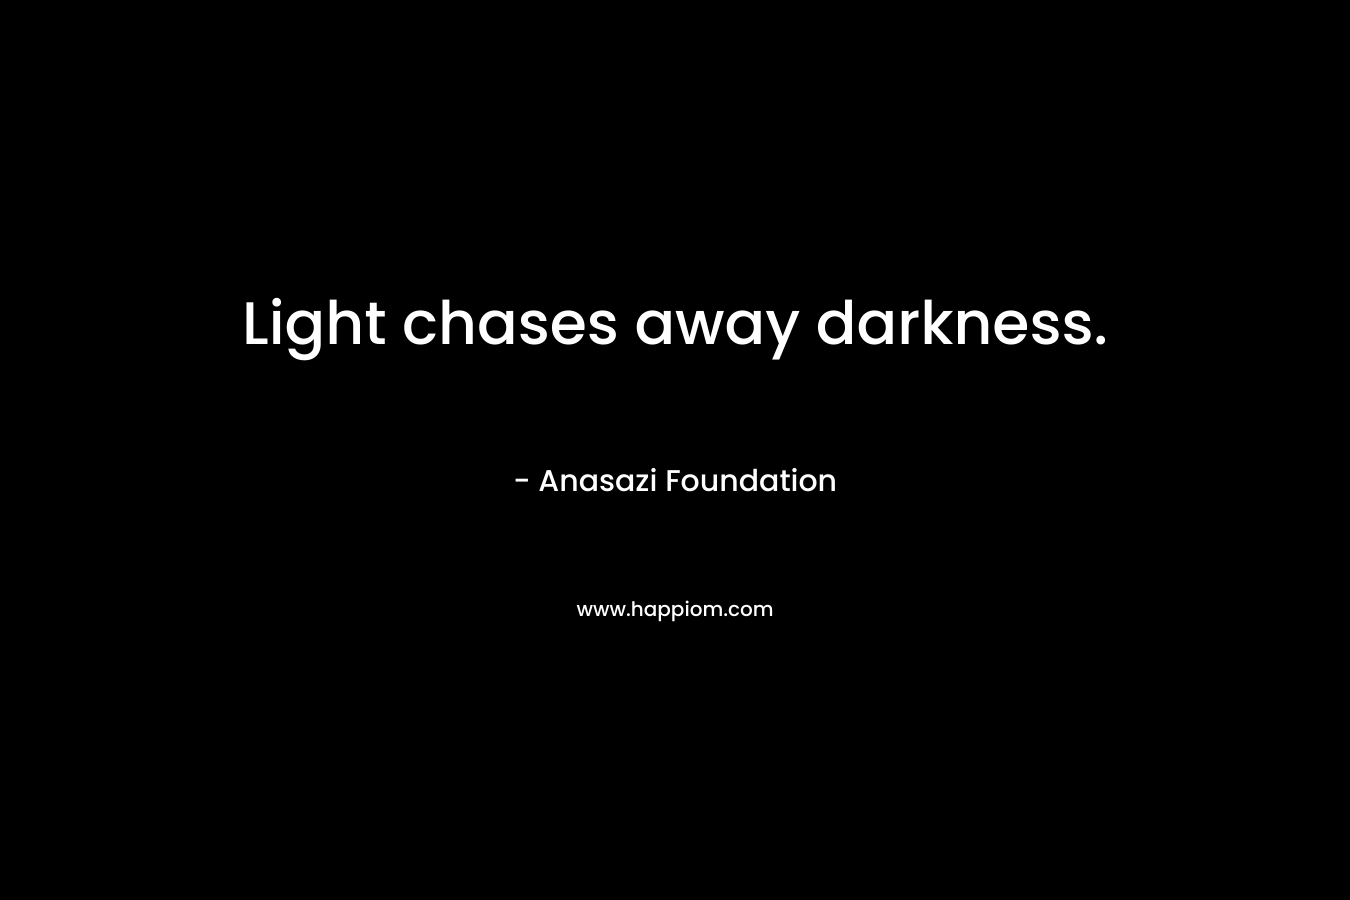 Light chases away darkness.